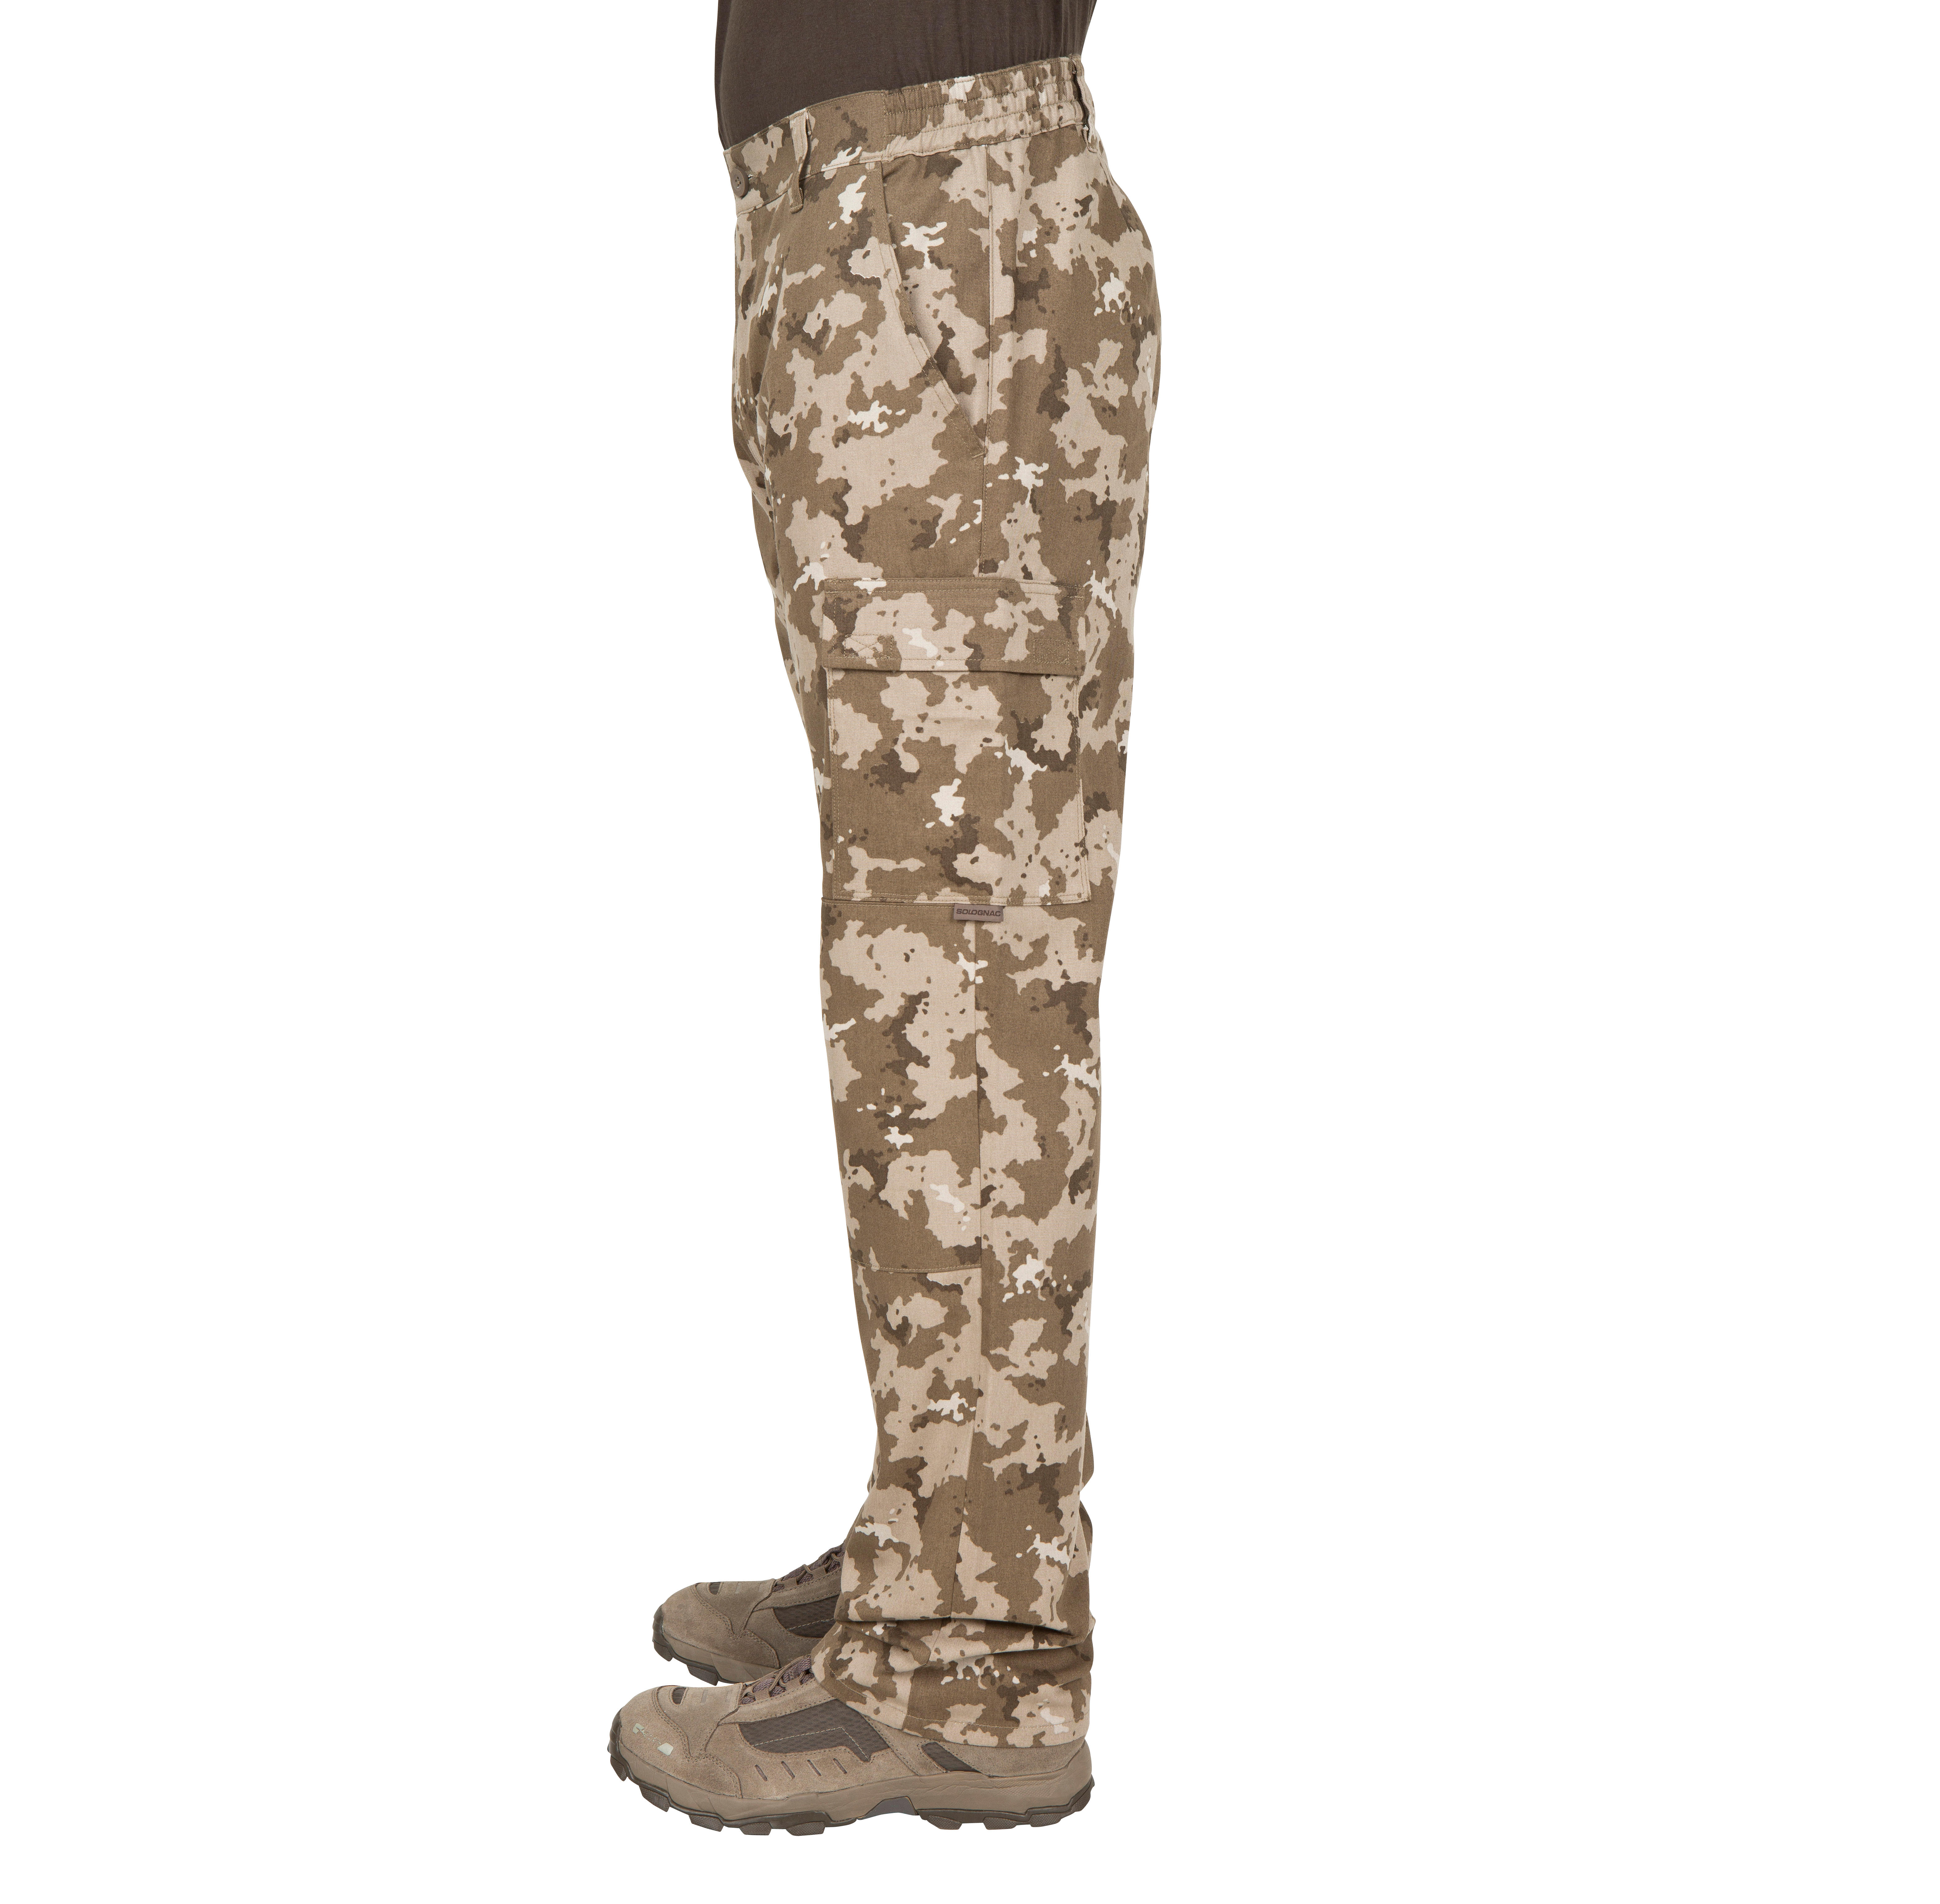 DECATHLON CAMO PANTS Mens Fashion Bottoms Trousers on Carousell